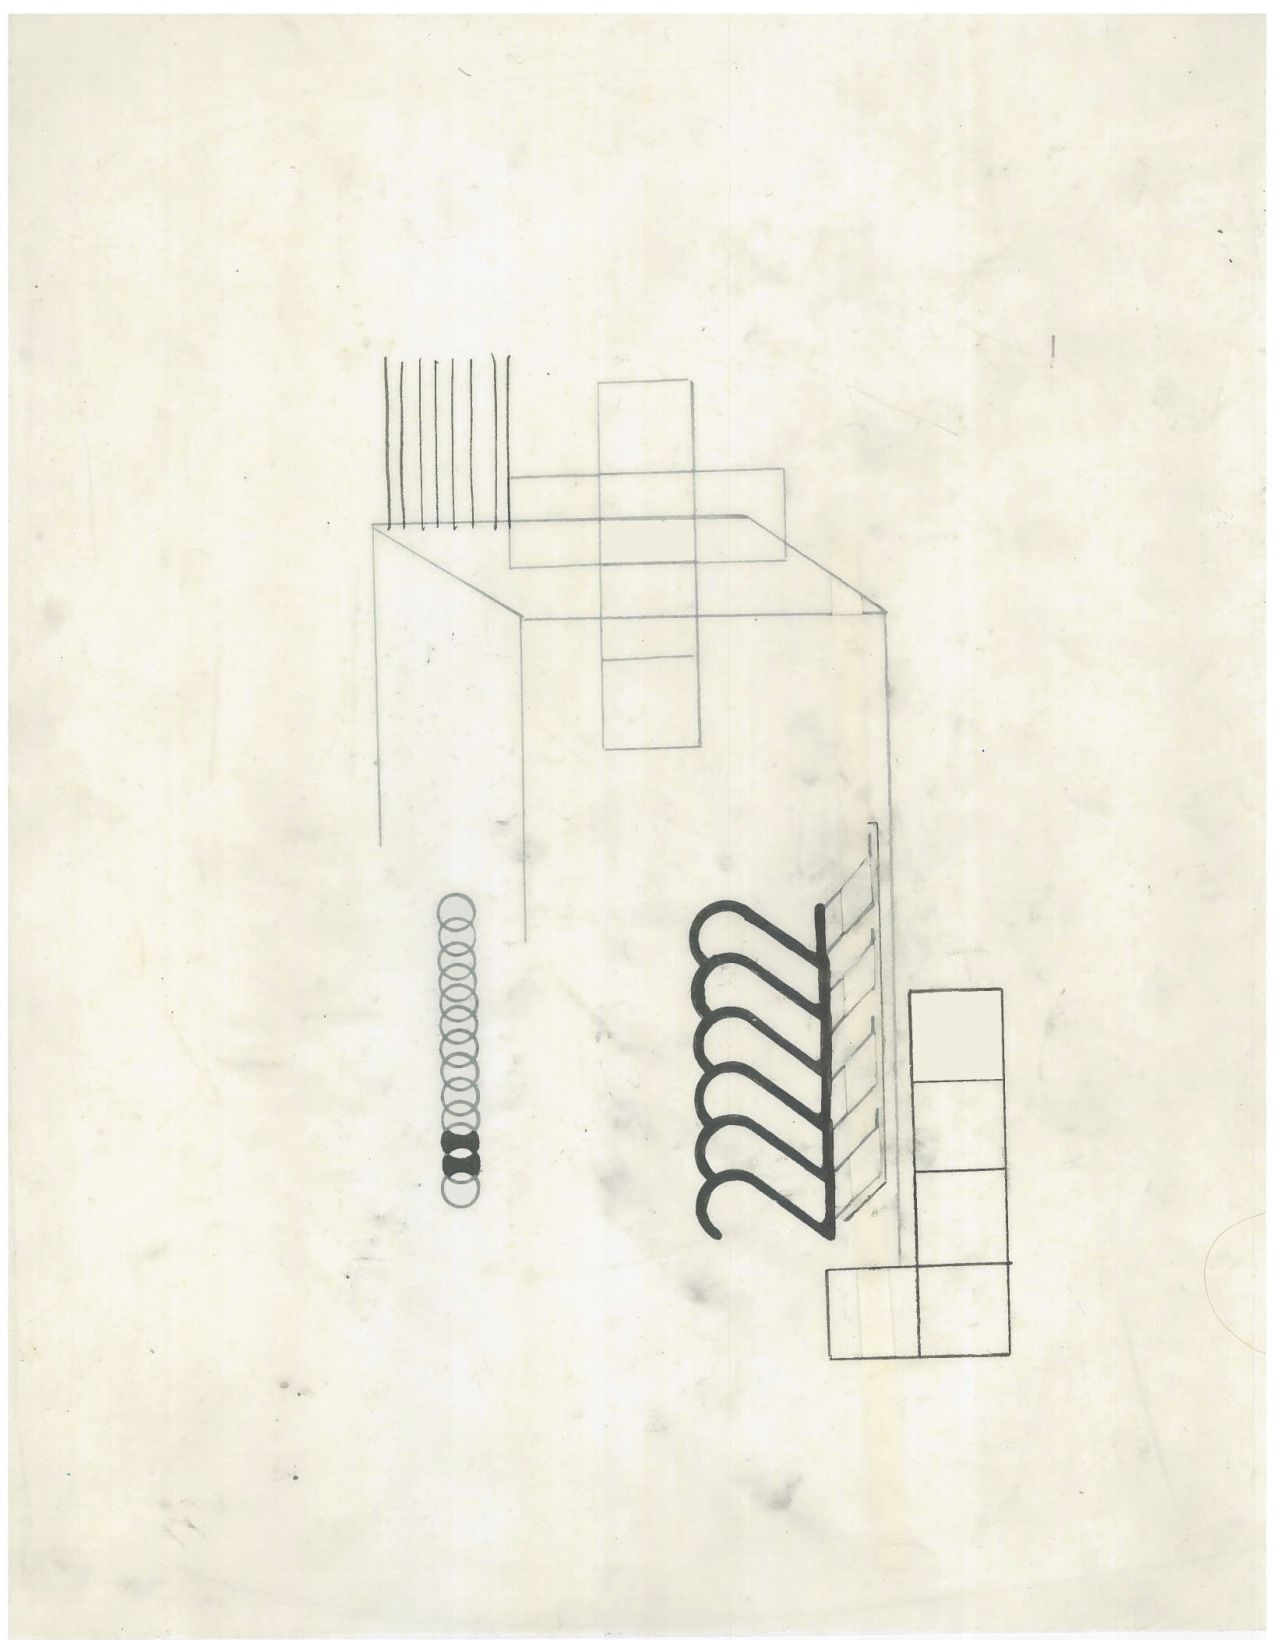 Untitled (the city, observations 19A)  Pencil, collage and layered oiled fabriano paper.   279mm x 216mm  December 2013